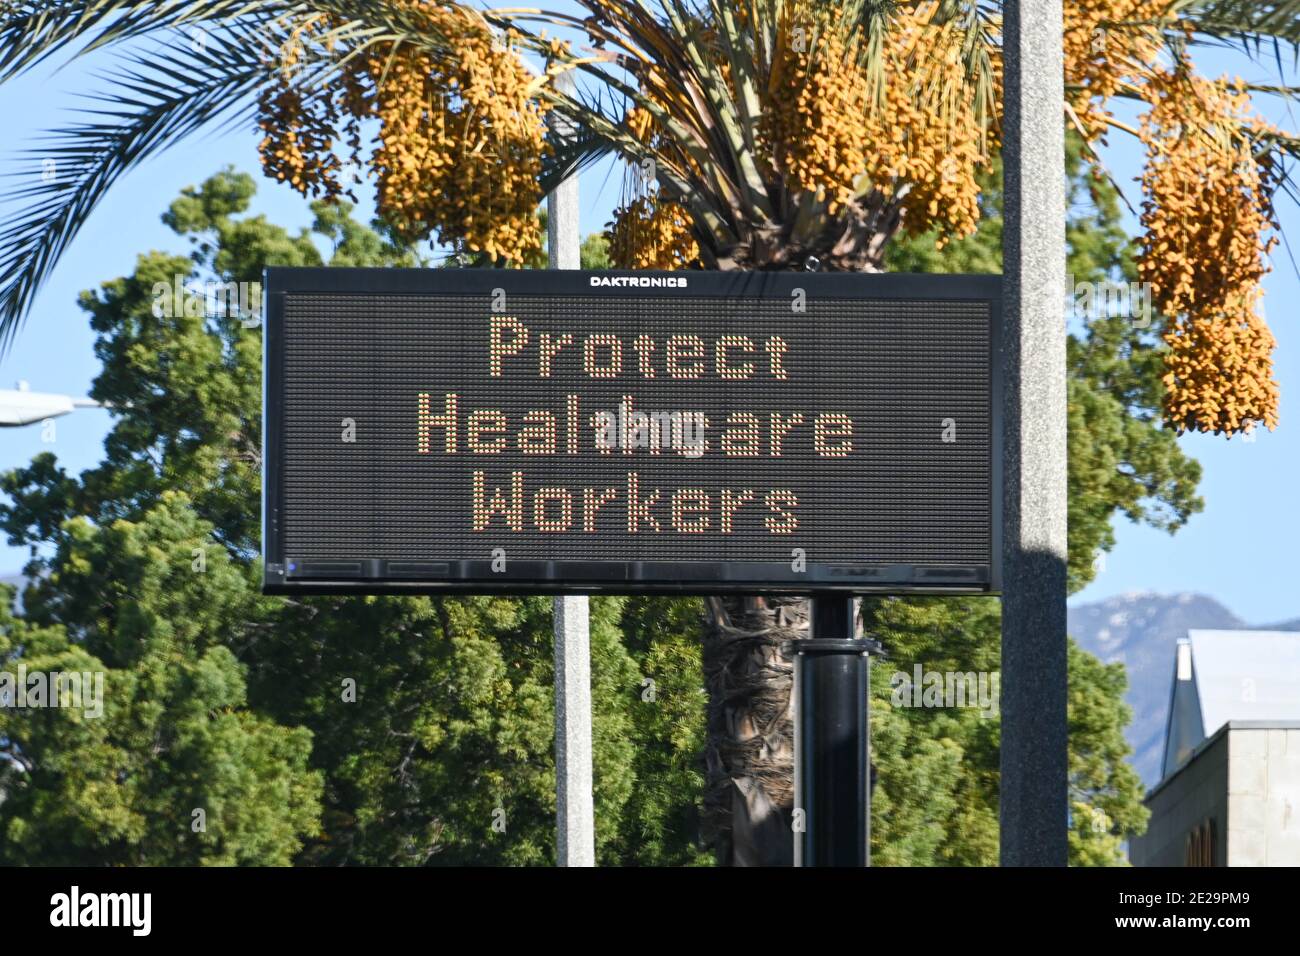 A message board is illuminated reading “Protect Healthcare Workers”, Saturday, Jan. 2, 2021, in Pasadena, Calif. (Dylan Stewart/Image of Sport) Stock Photo